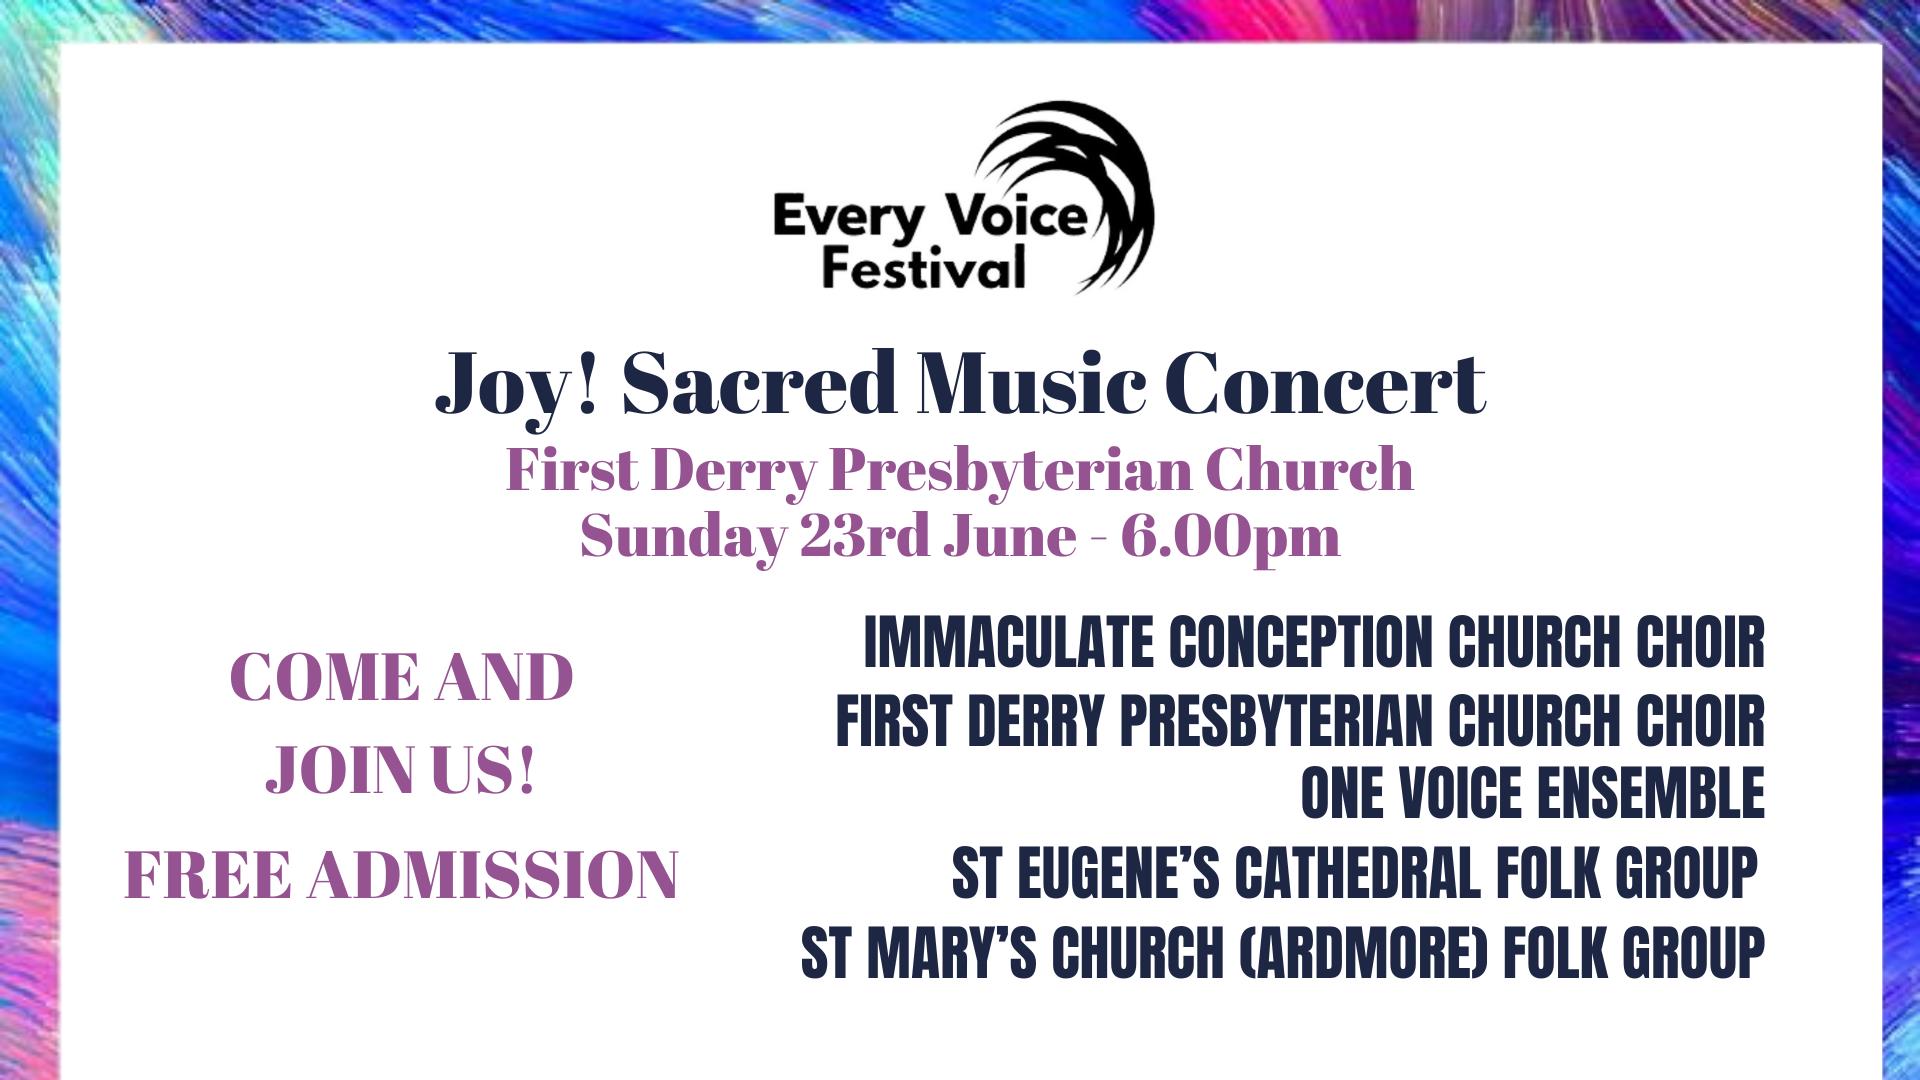 Poster detailing performers at the Every Voice Festival Joy! Sacred Music Concert